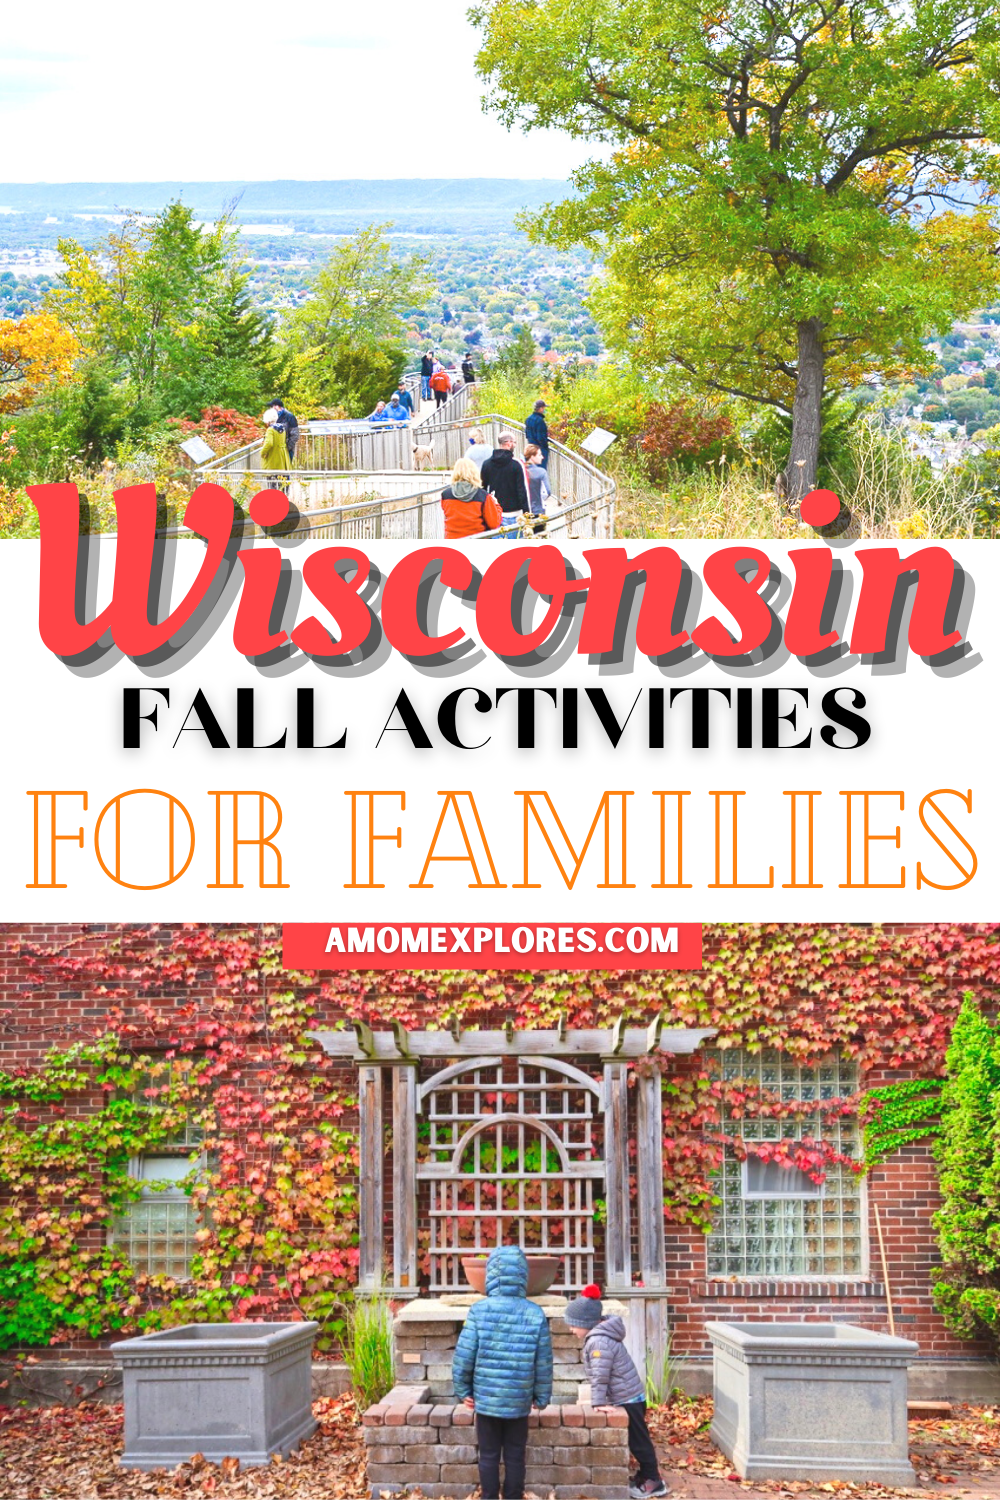 Wisconsin Fall Activities for Families.png